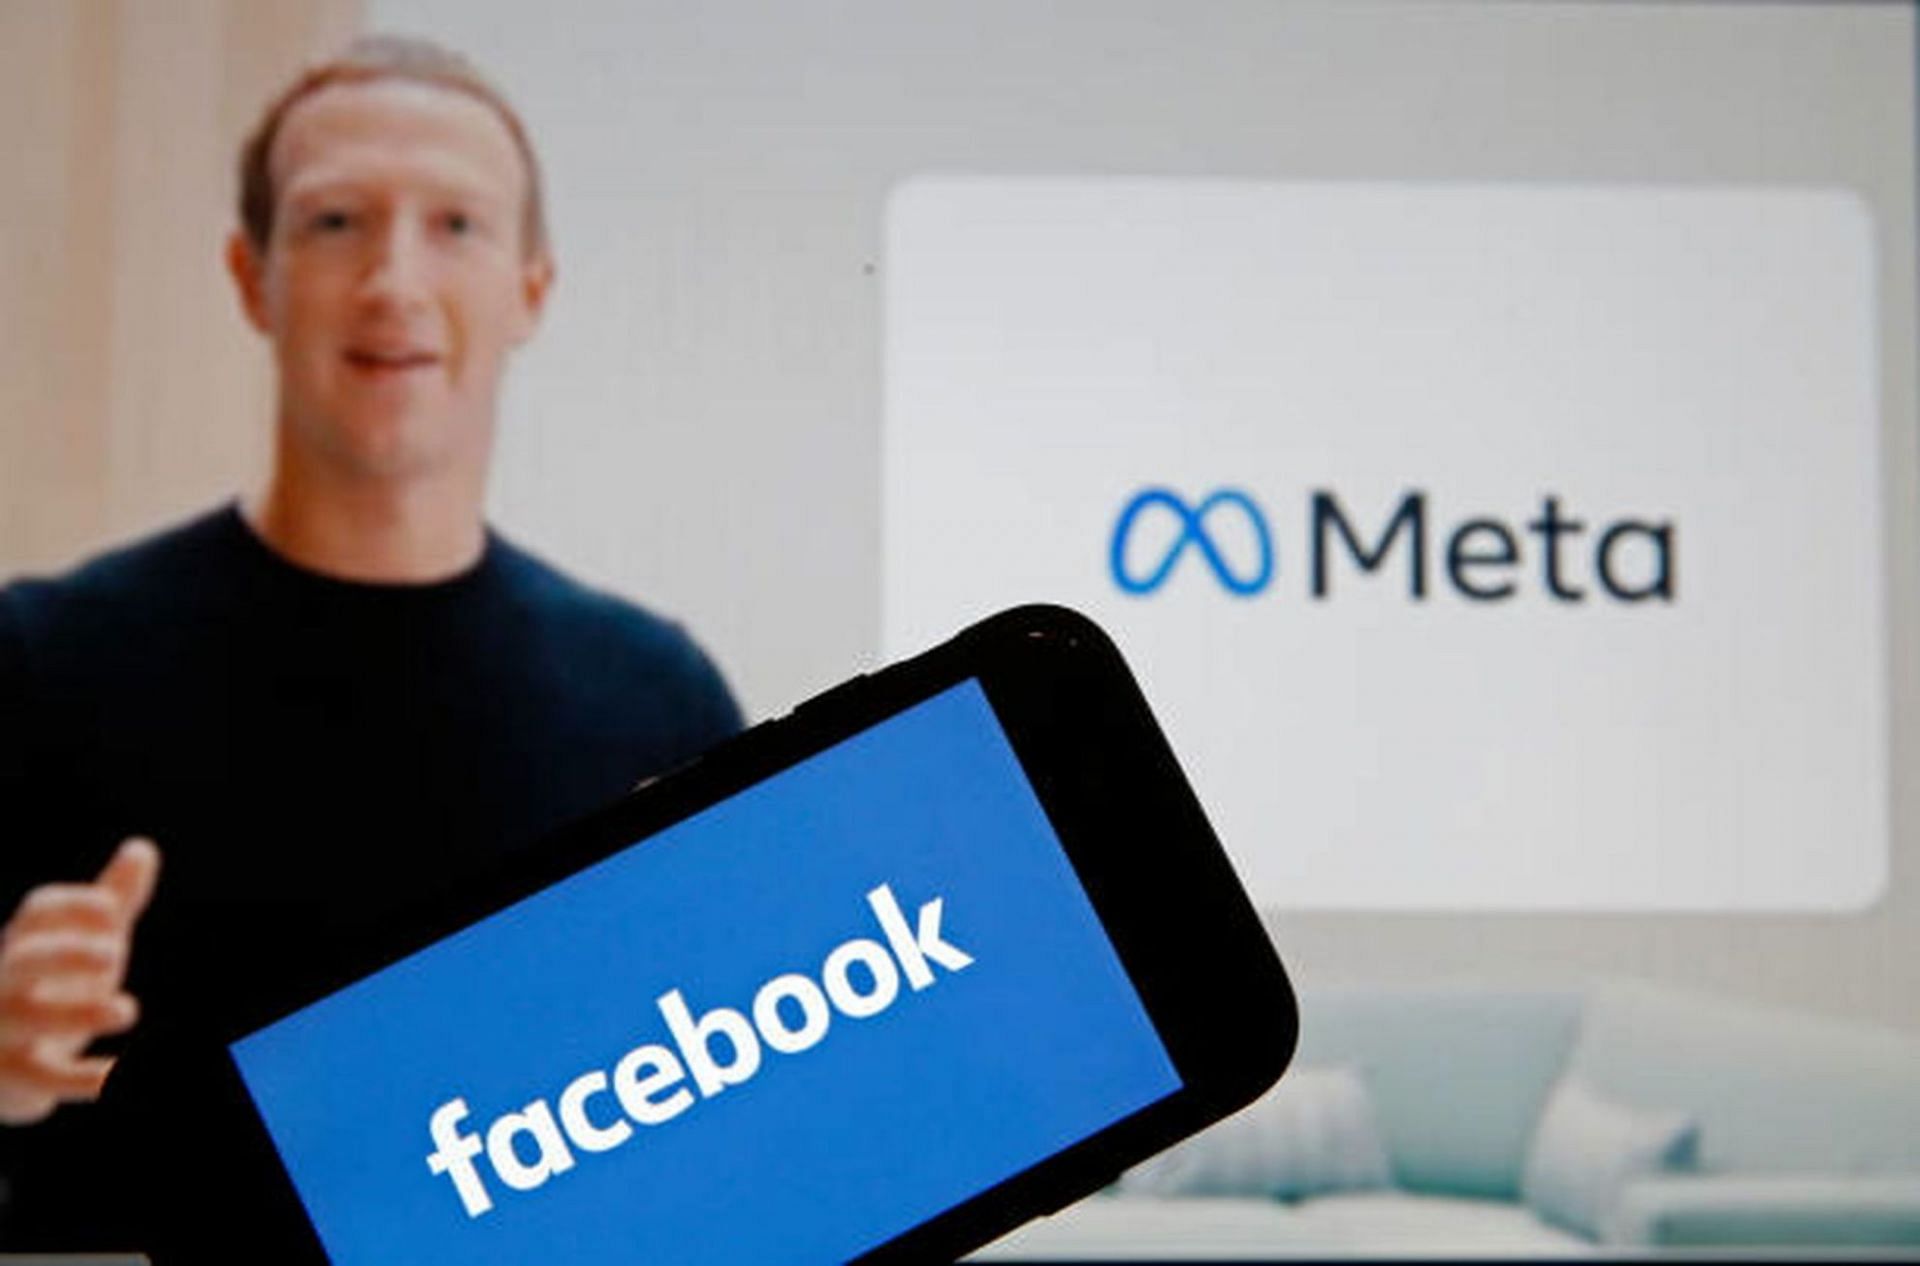 Mark Zuckerberg loses billions as Facebook&#039;s parent firm Meta&#039;s stocks drop (Image via Chesnot/Getty Images)